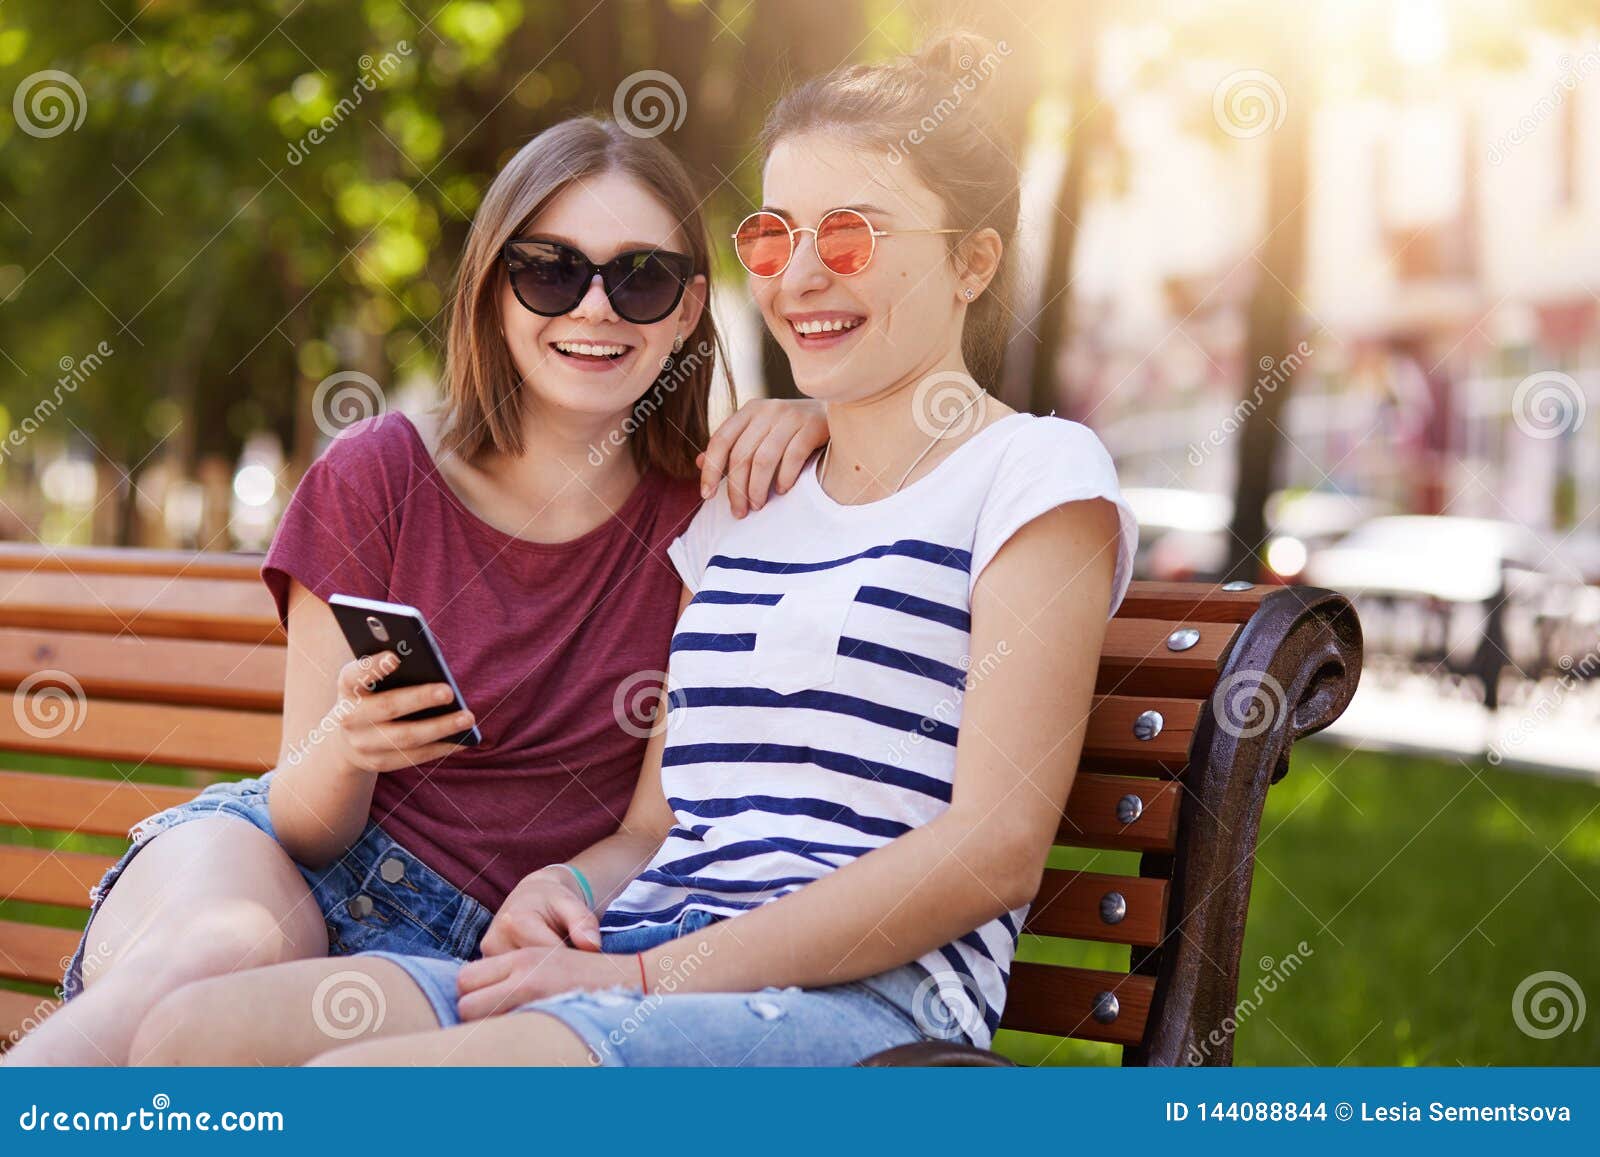 Attractive Young Friends Sit in the Park, Discuss Latest News in Their ...